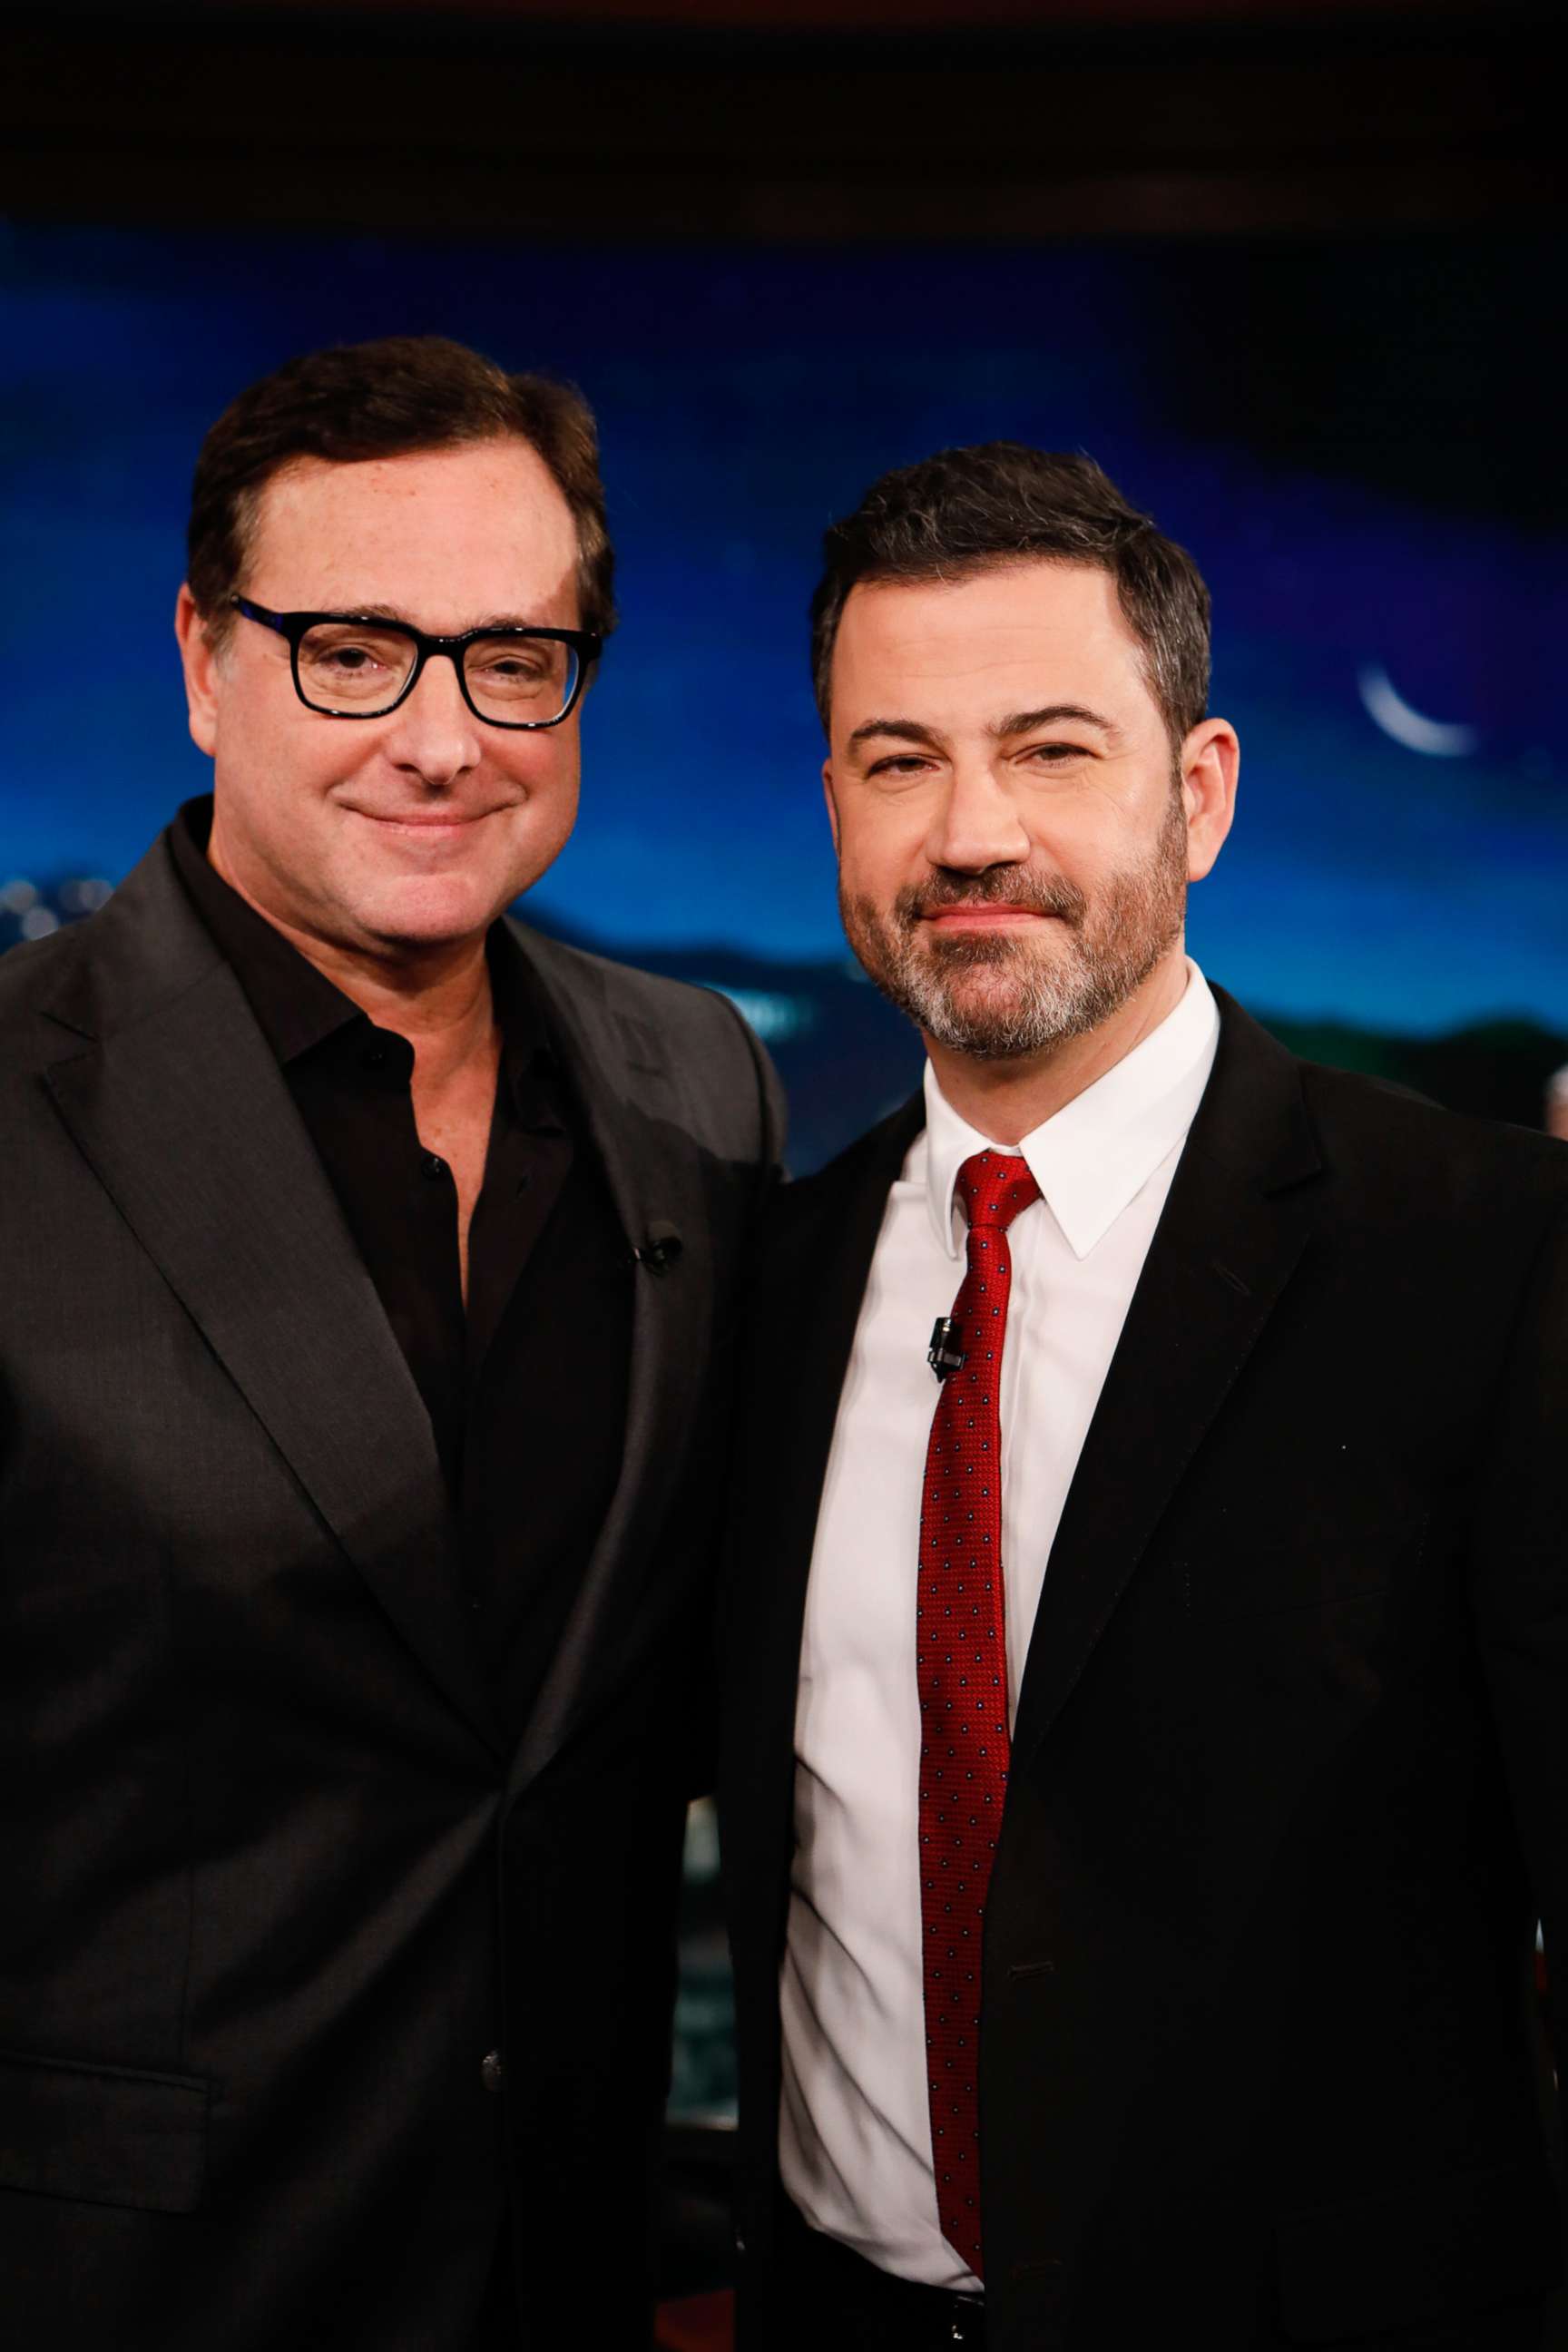 PHOTO: In this March 12, 2019 file photo Bob Saget and Jimmy Kimmel on "Jimmy Kimmel Live!"